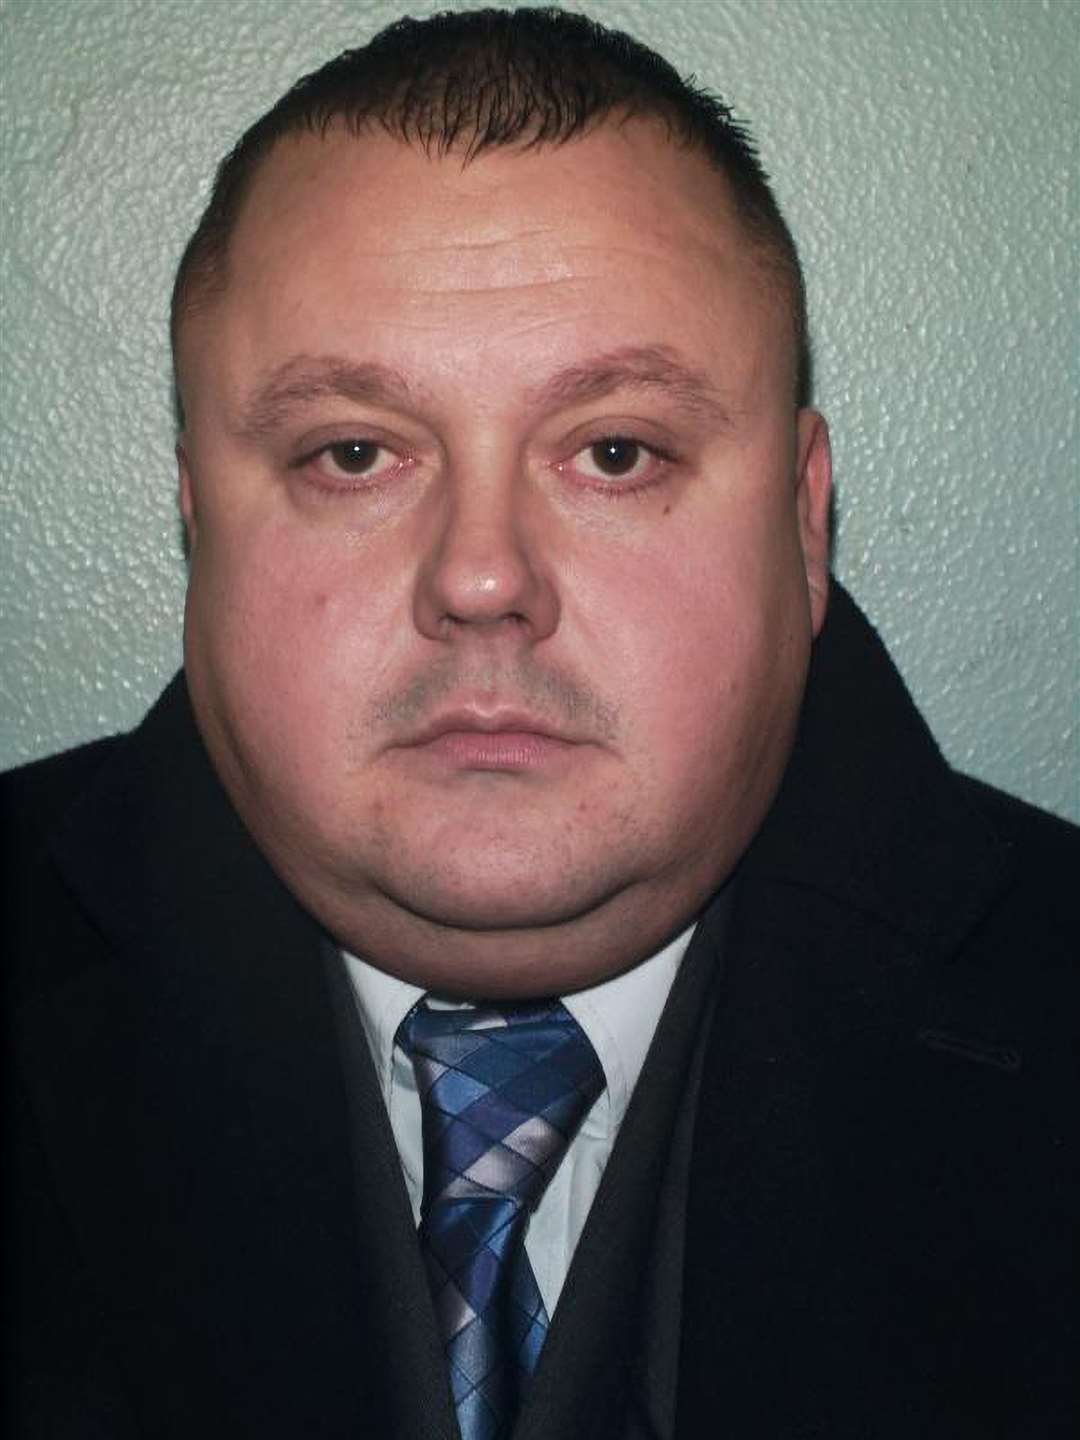 Former bouncer Levi Bellfield, 54, wrote a letter of confession to Michael Stone's lawyers in February